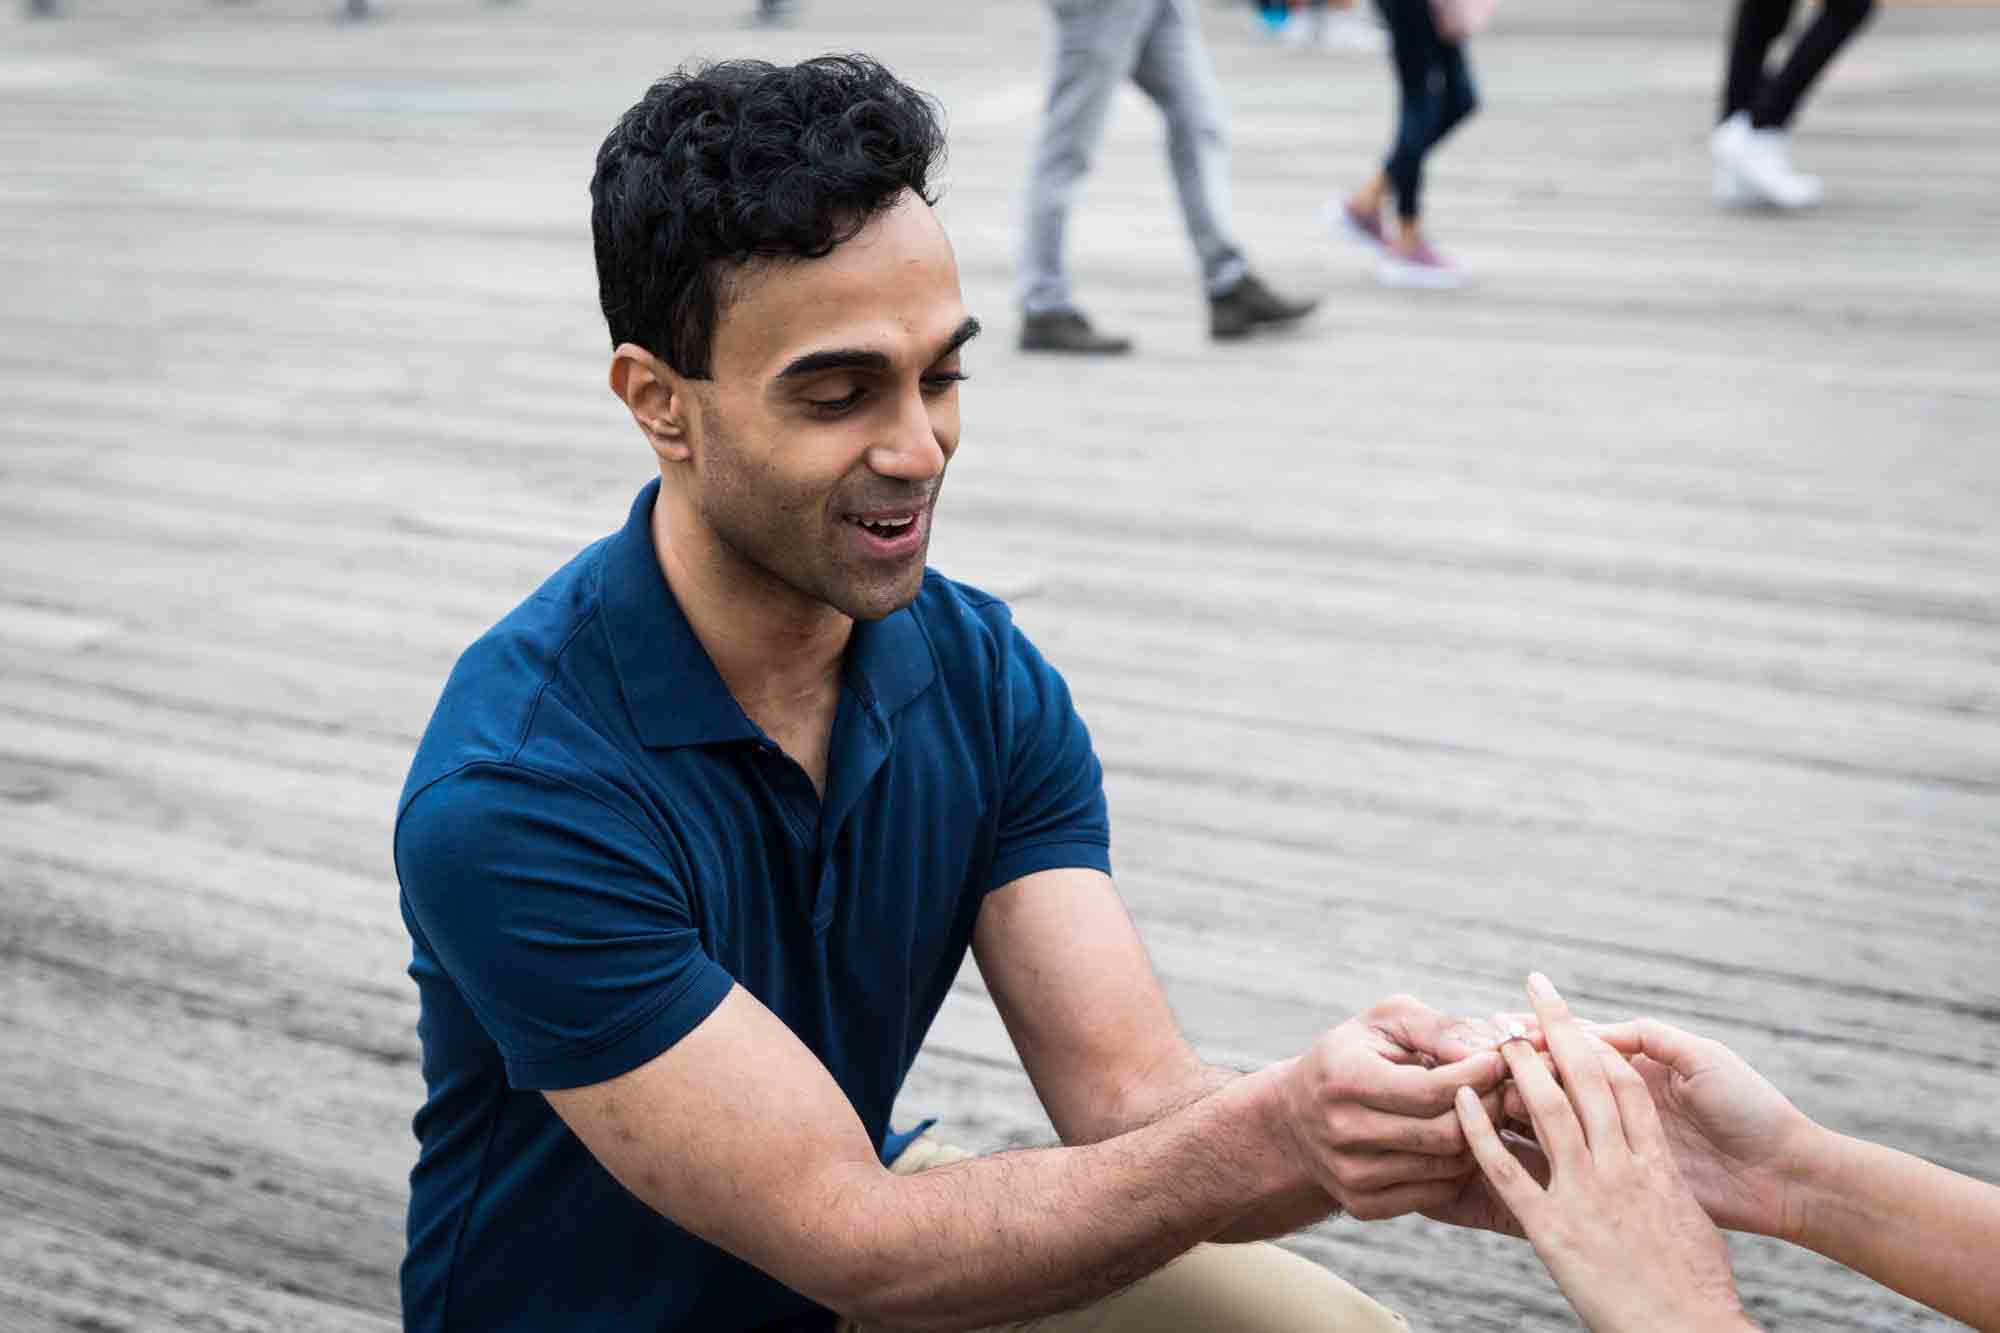 Man proposing to woman on a bench on a dock in Brooklyn Bridge Park